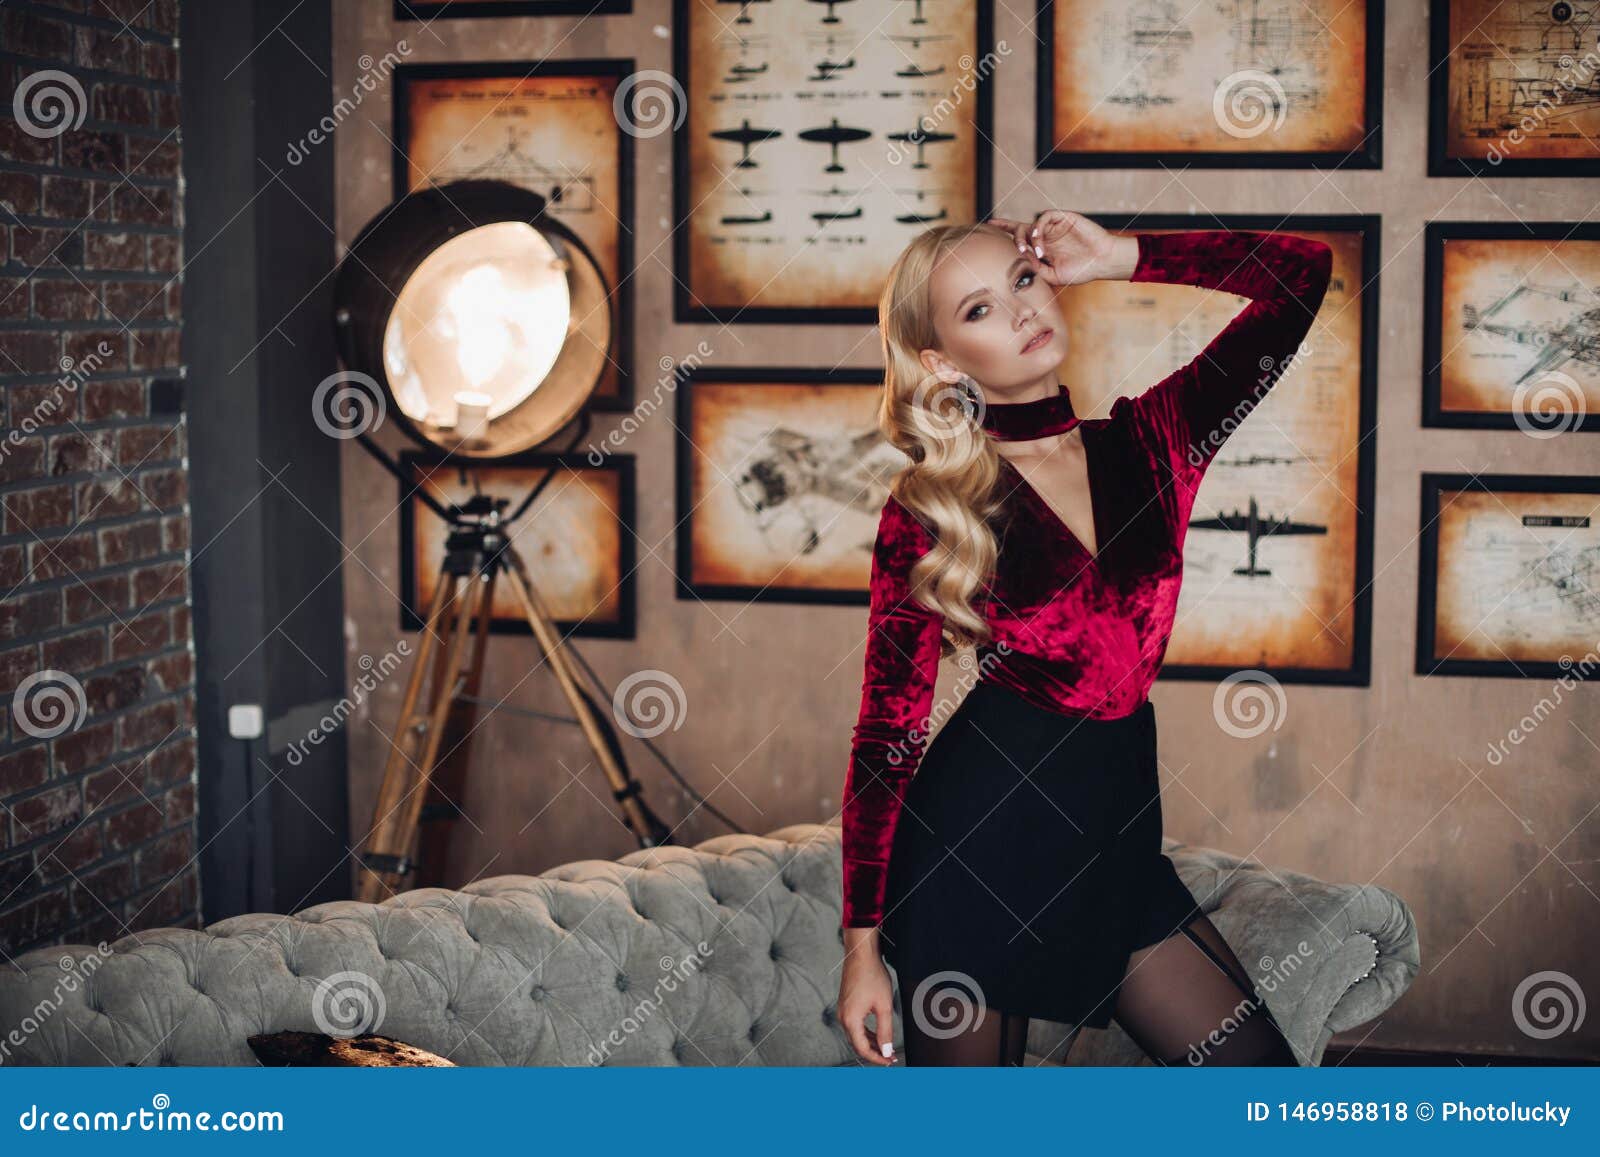 Sexy Young Blonde Woman In Stylish Evening Dress And Tights At Sofa ...